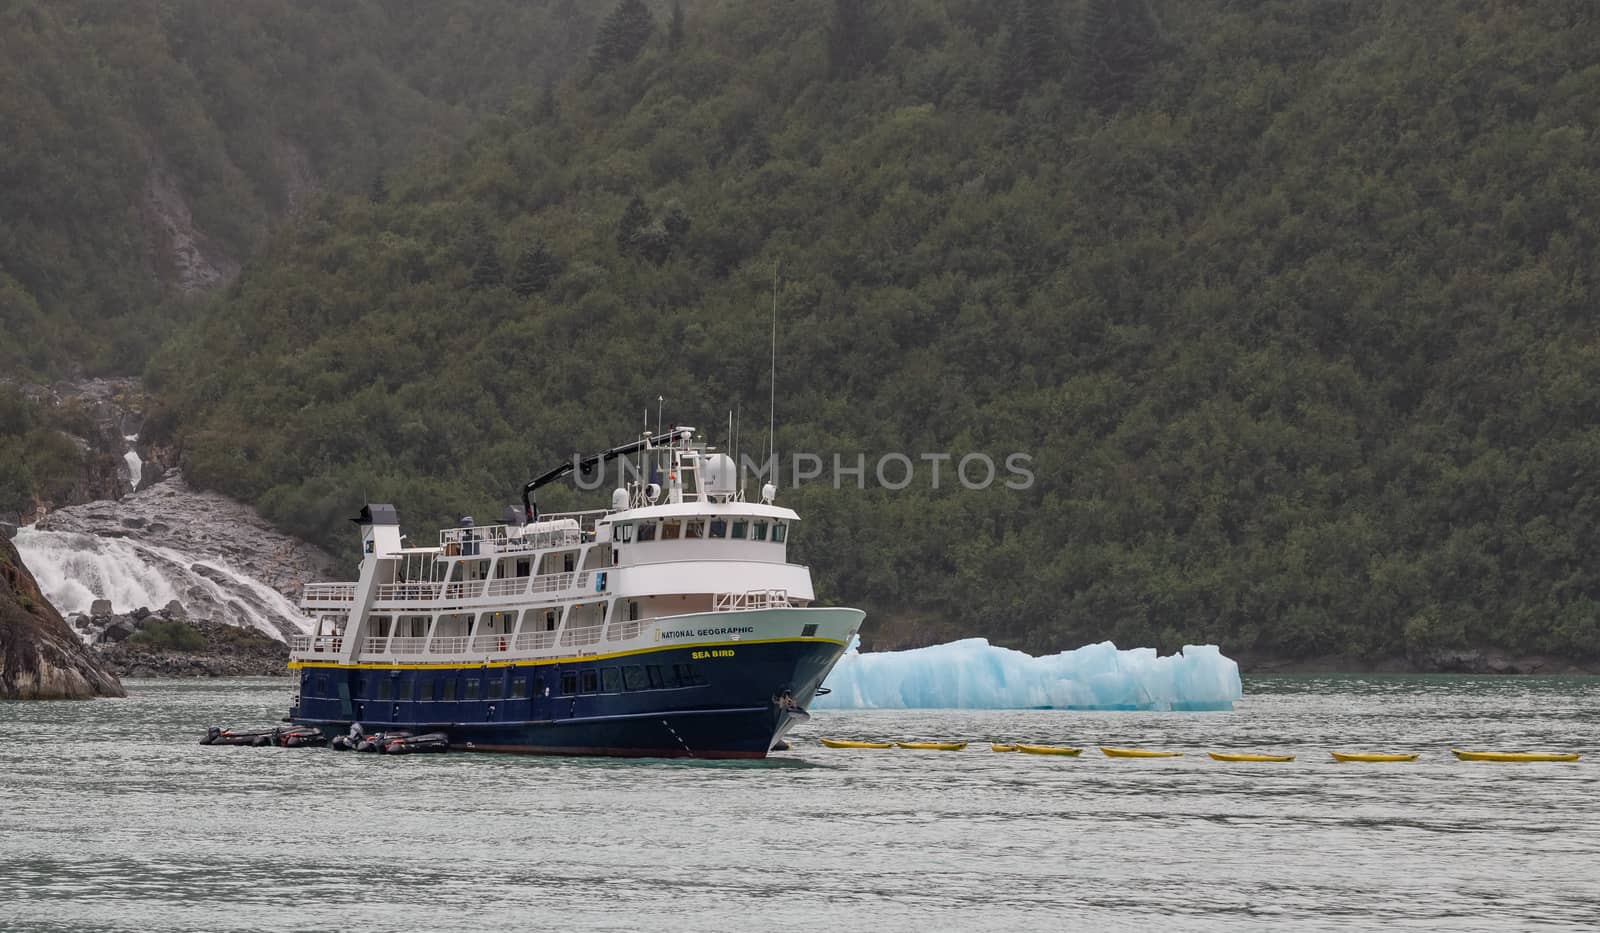 National Geographic's vessel anchored in fjord by DamantisZ